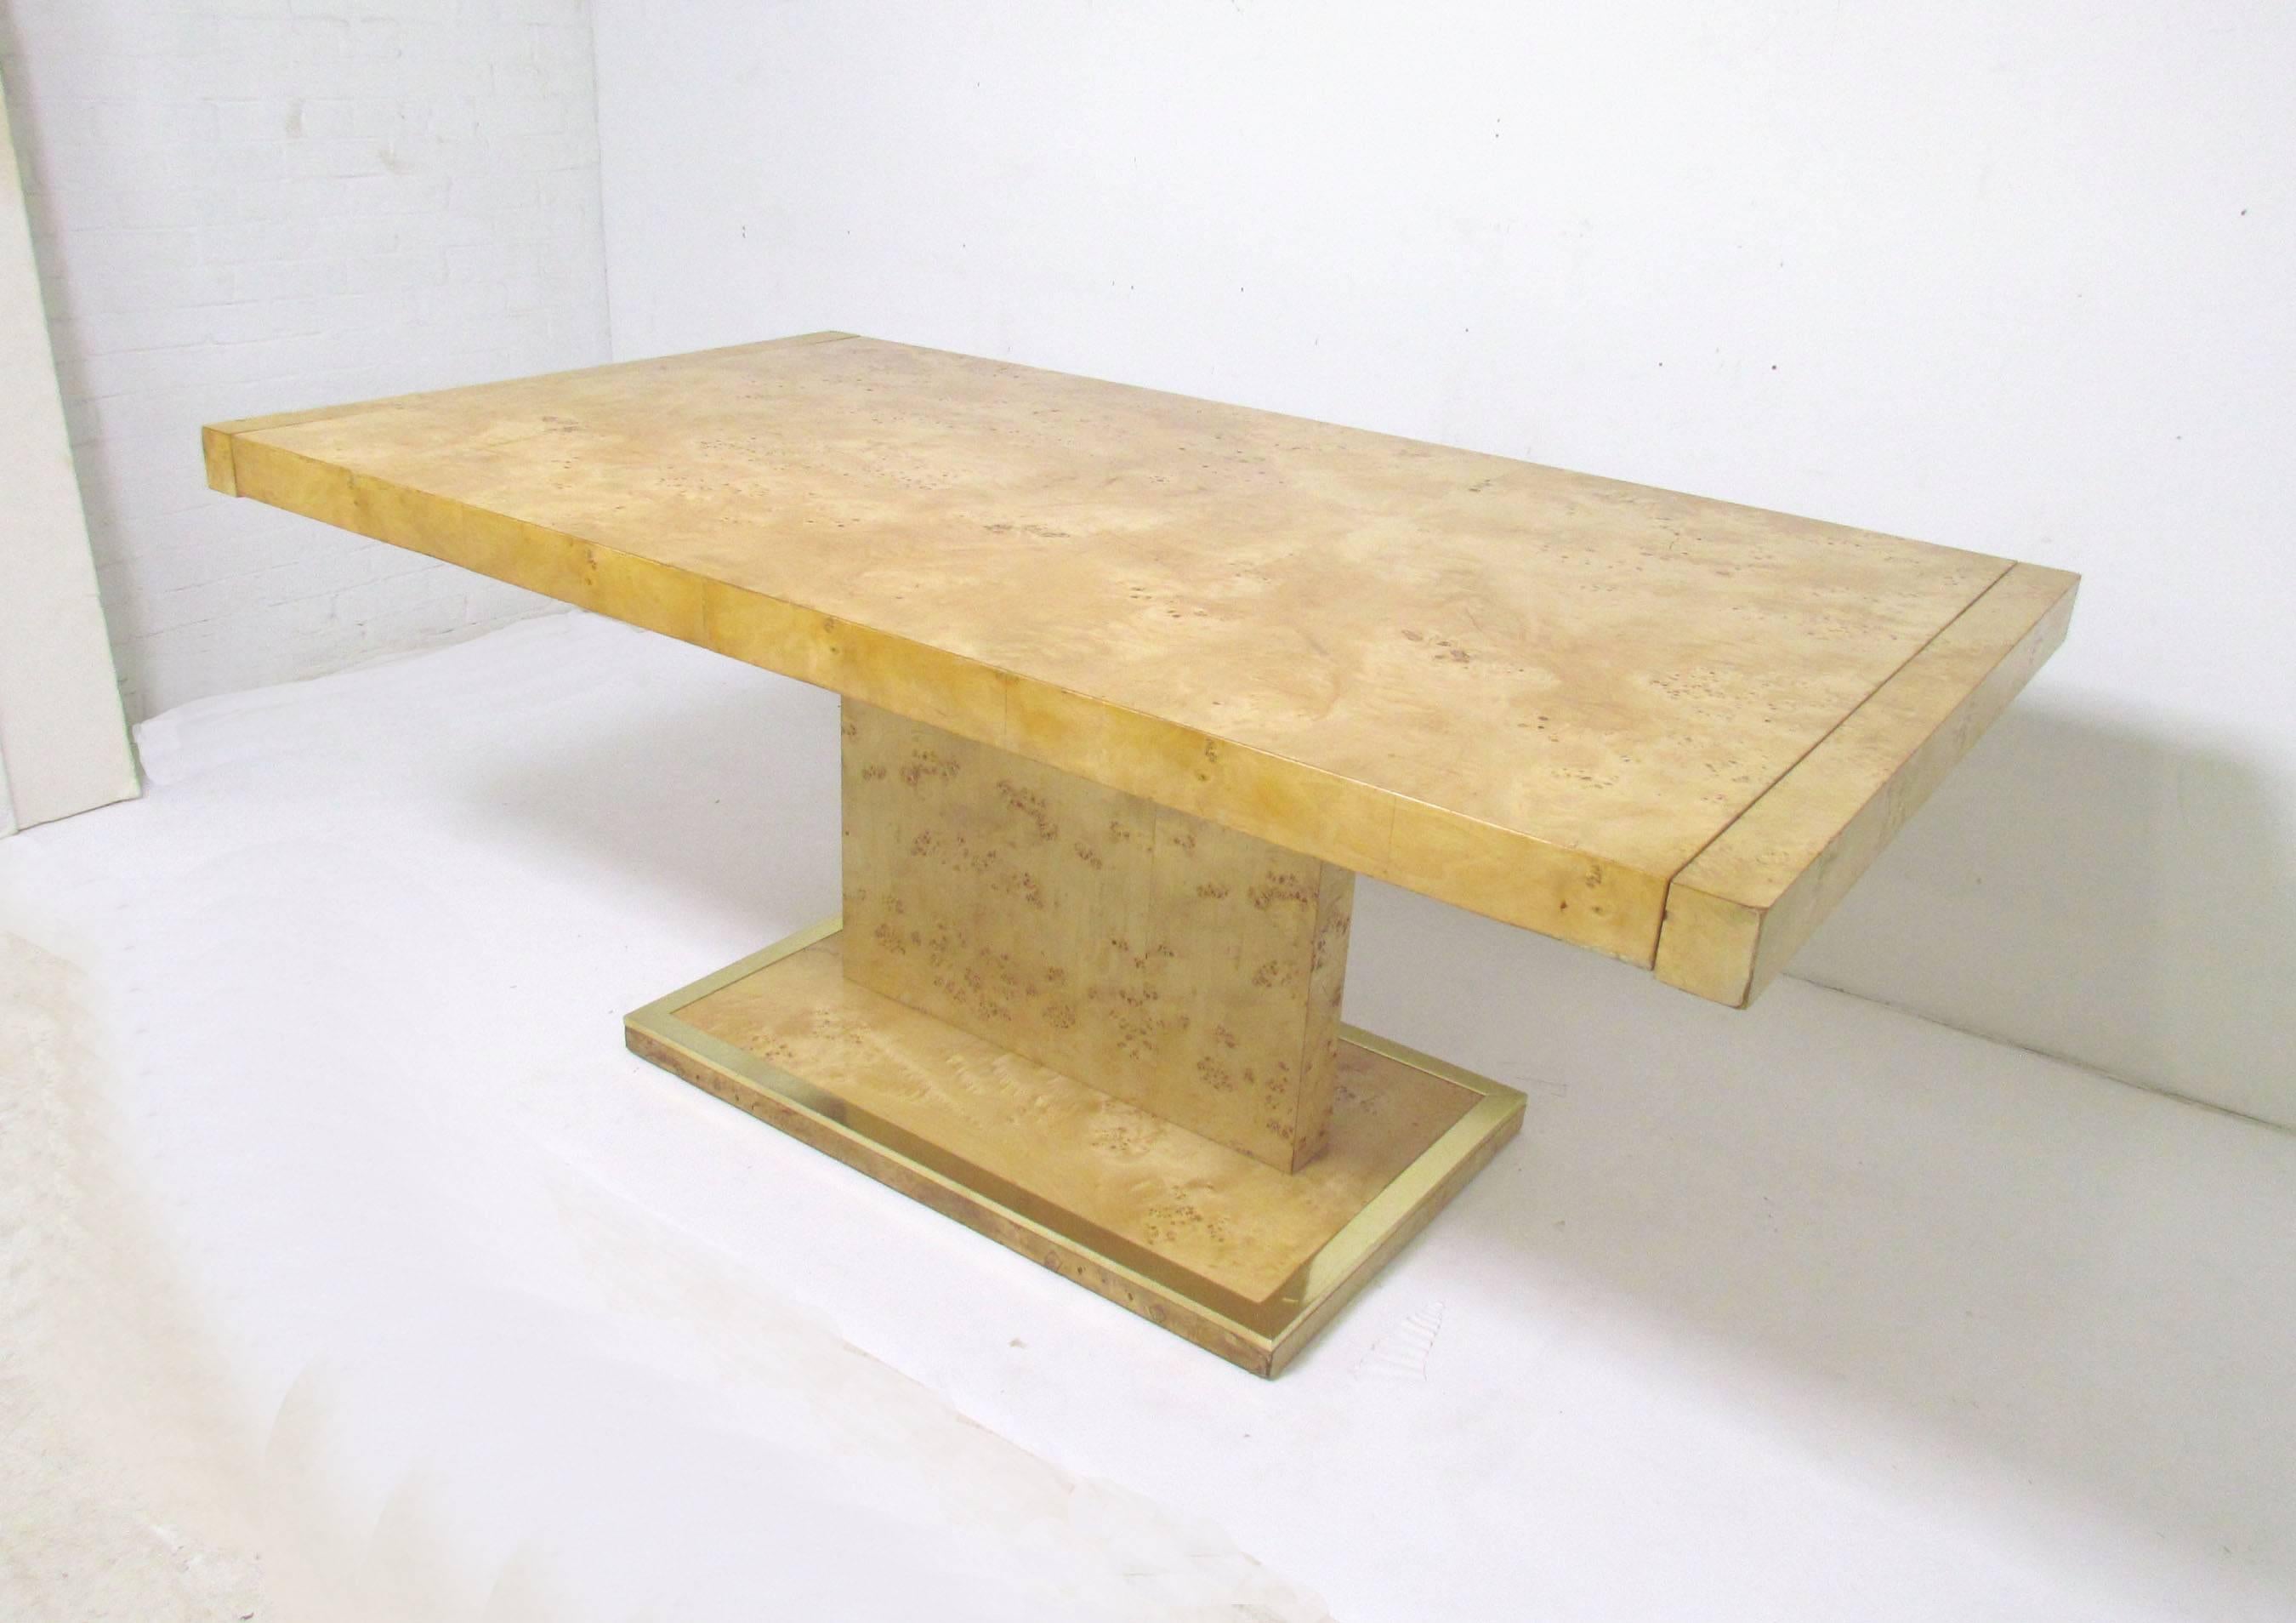 Impressive pedestal form Mid-Century Modern burl wood dining table by Founders, a division of Thomasville Furniture, circa 1970s, in the manner of Milo Baughman. Features brass accented pedestal base, and two extension leaves that drop into either